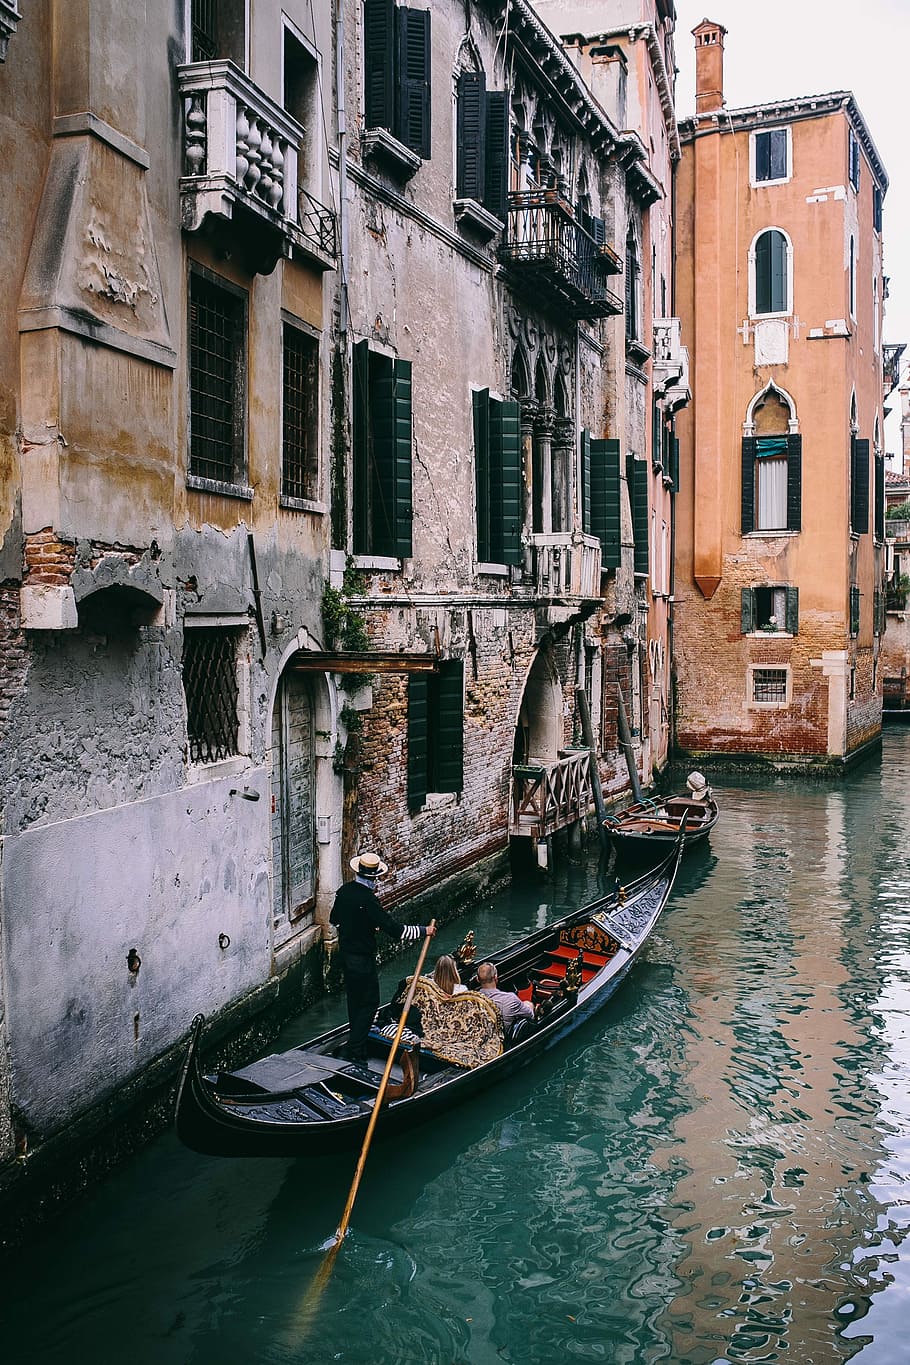 trip, venice, Venice, Italy, vacations, architecture, buildings, old town, Europe, travel, italian